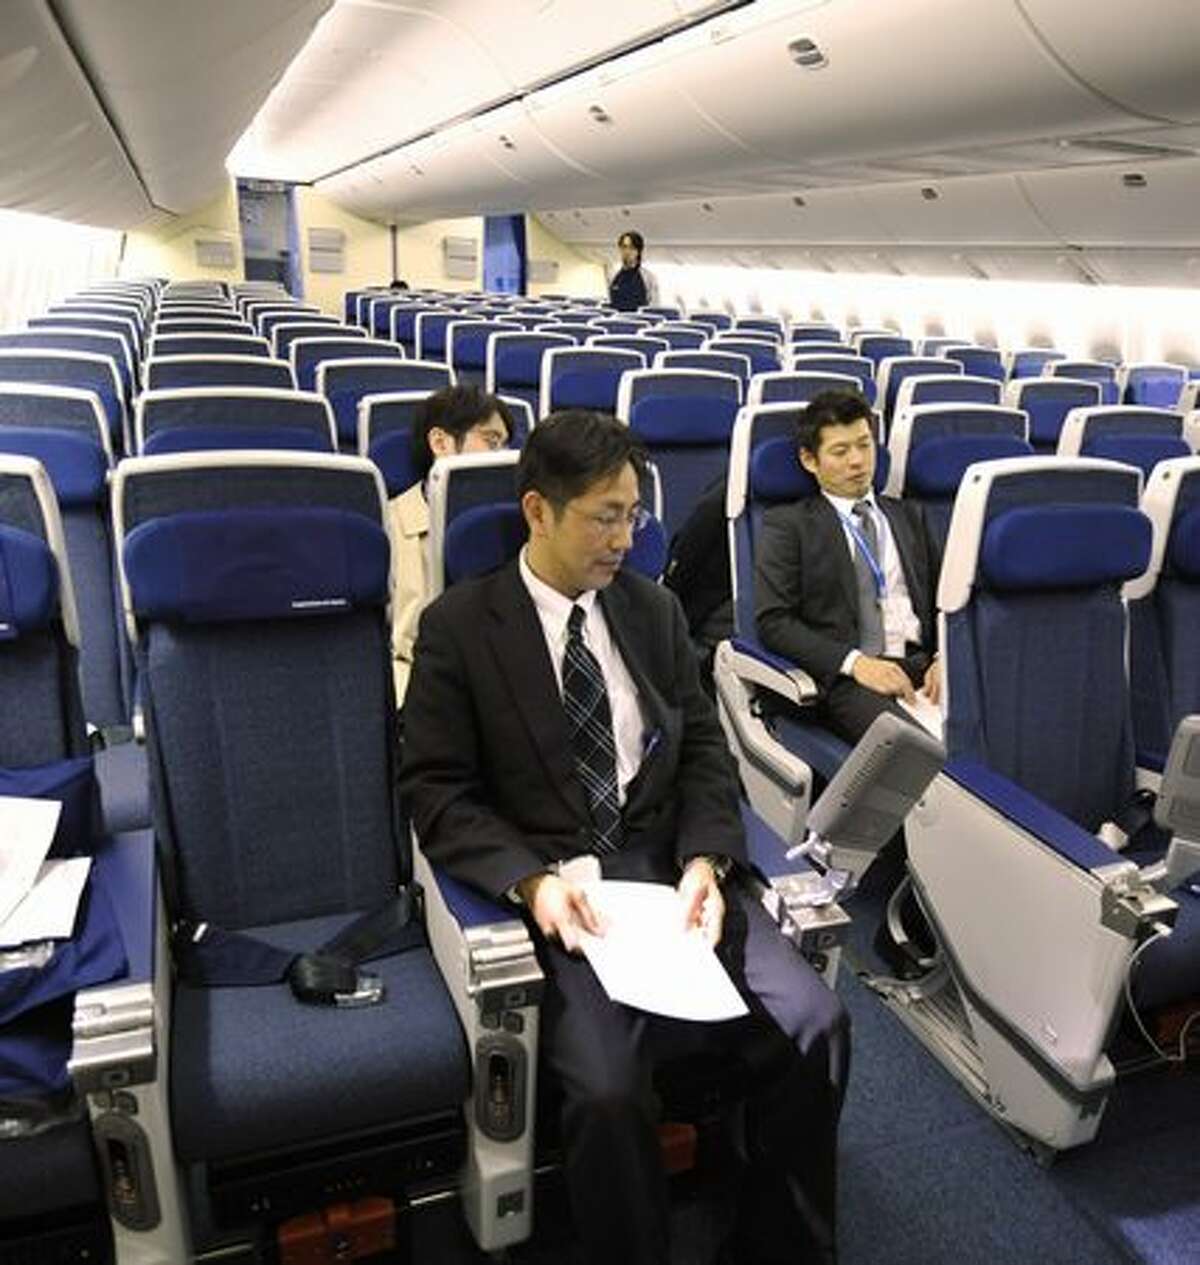 Employees of Japan's All Nippon Airways introduce economy-class seats in the company's new Boeing 777-300ER during a press preview at an ANA hangar in Narita International Airport, suburban Tokyo on April 16, 2010. The new aircraft is scheduled to commence flights from April 19 on the Narita-New York route.